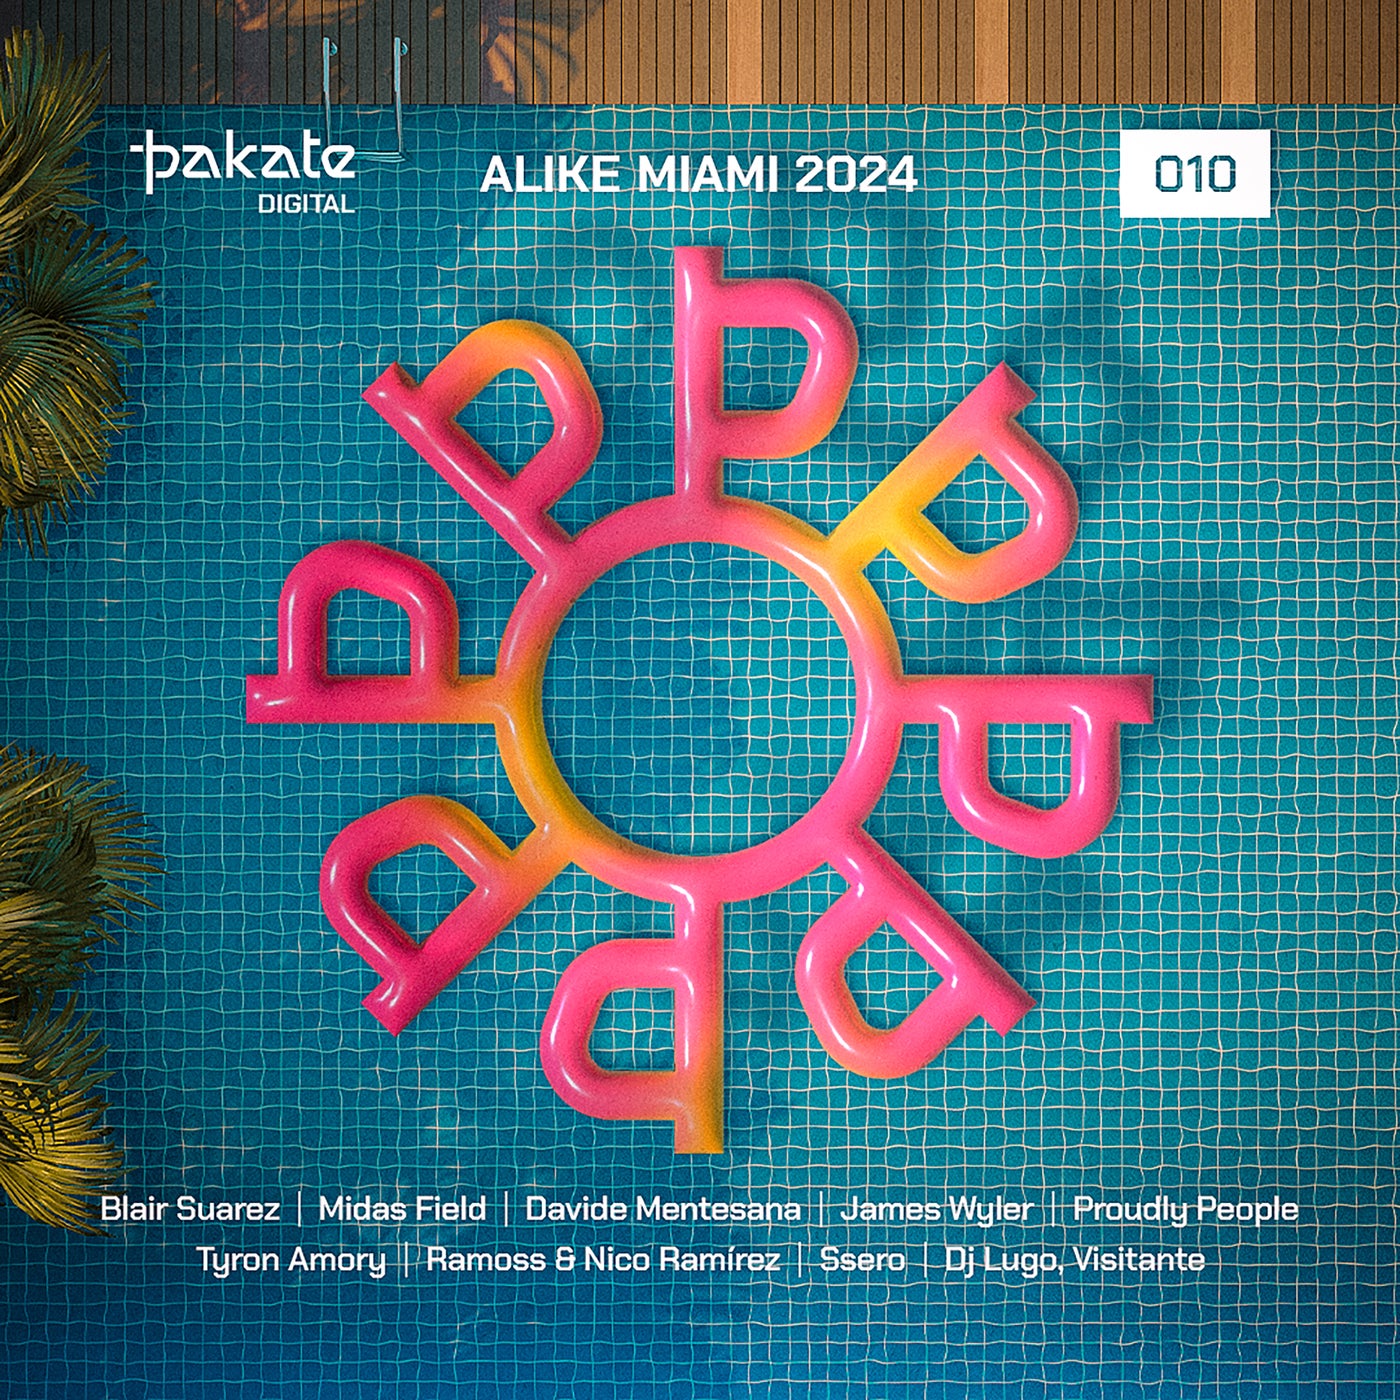 Release Cover: Pakate Alike - Miami 2024 Download Free on Electrobuzz